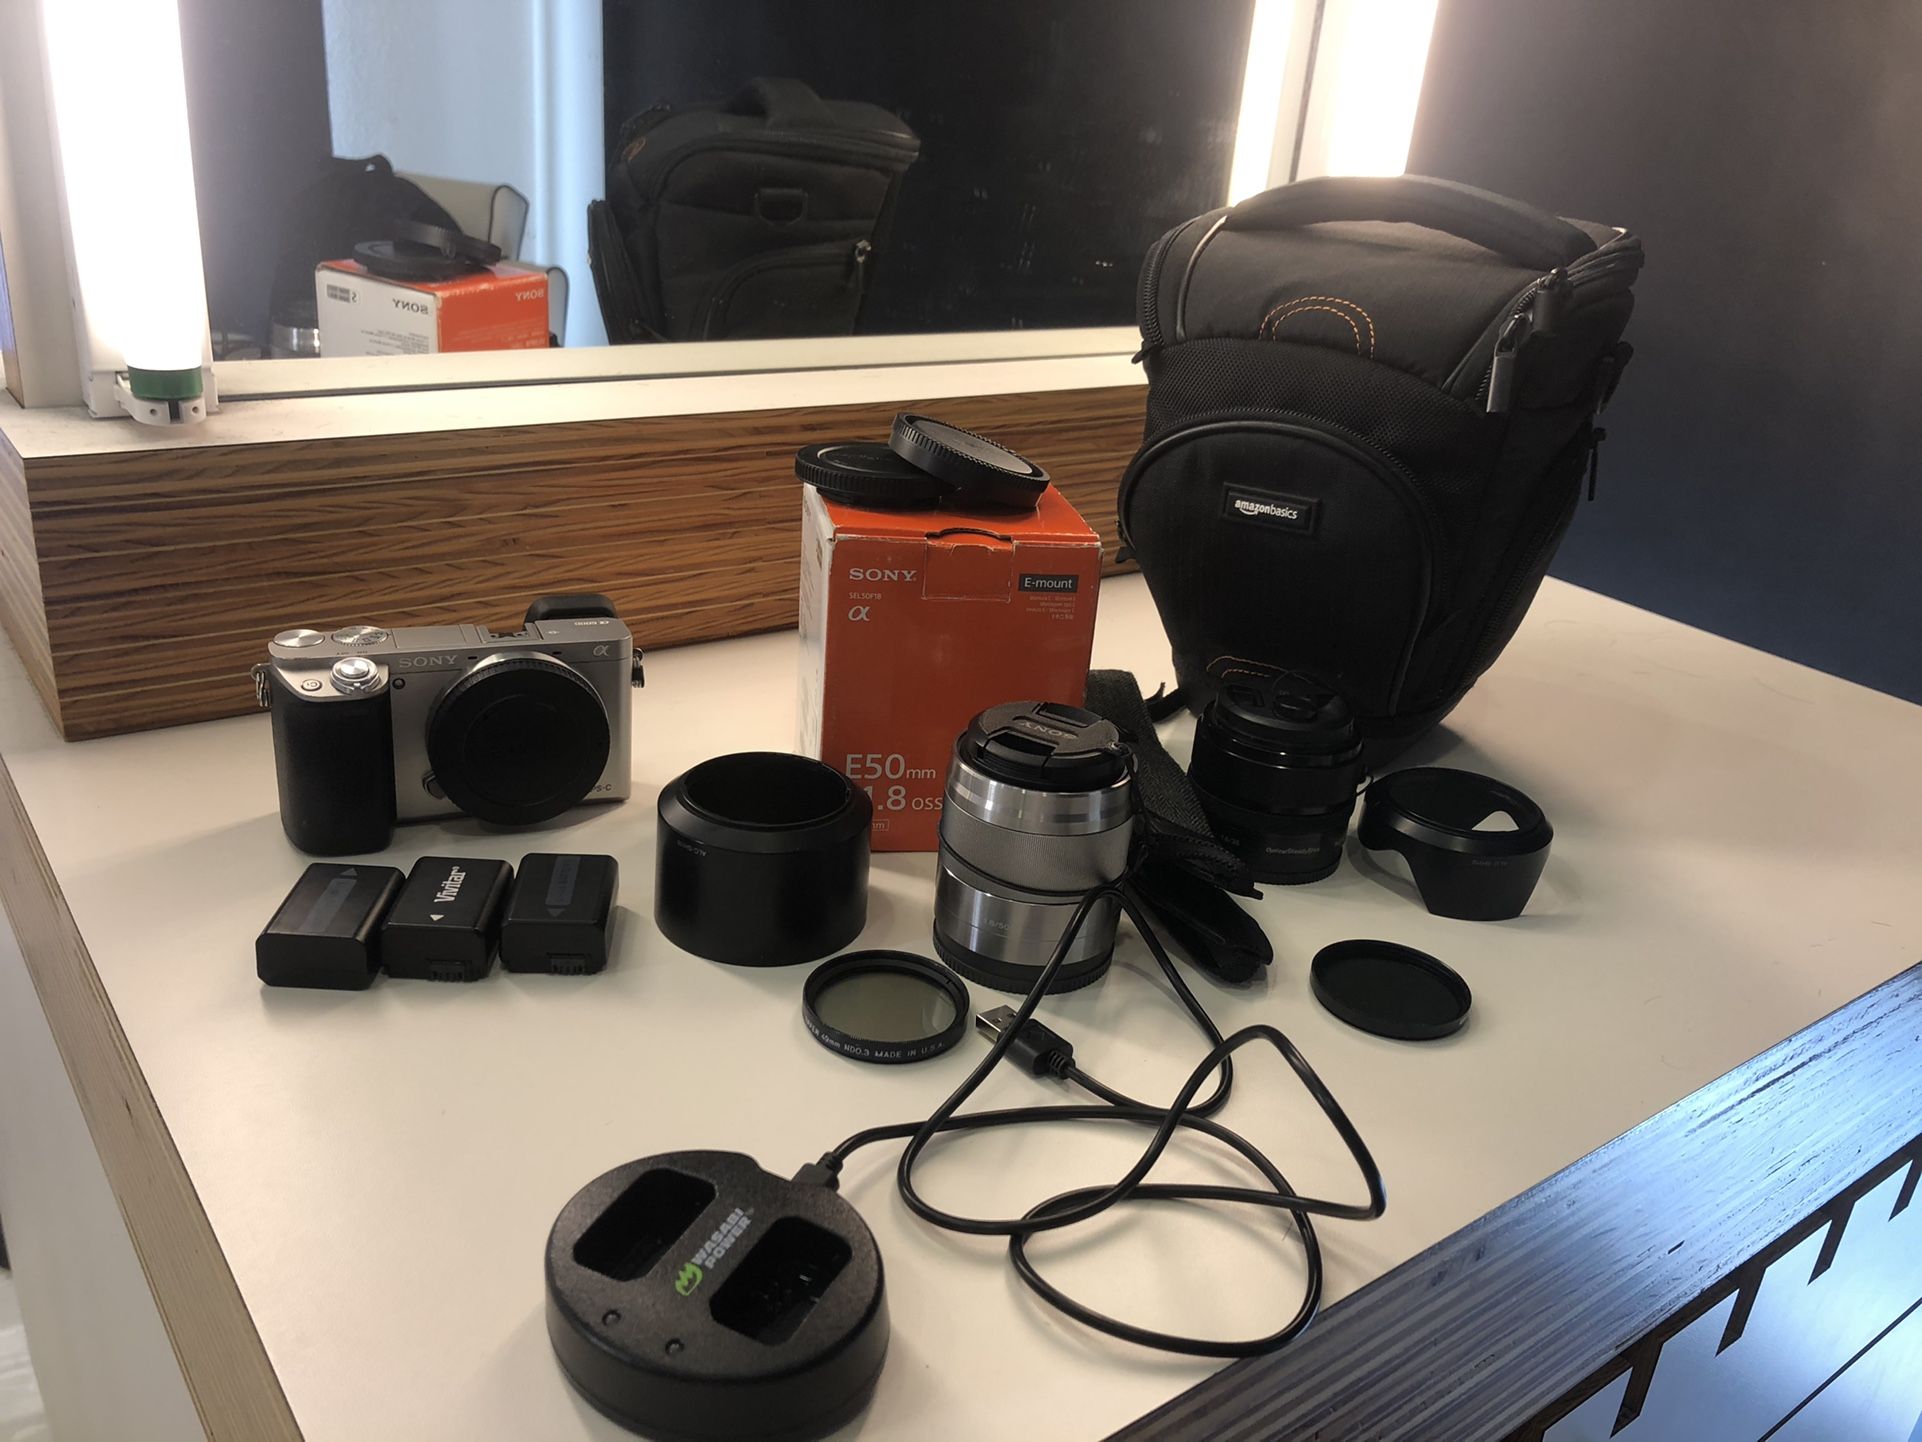 Sony a6000 with 50mm and 35mm lenses and accessories